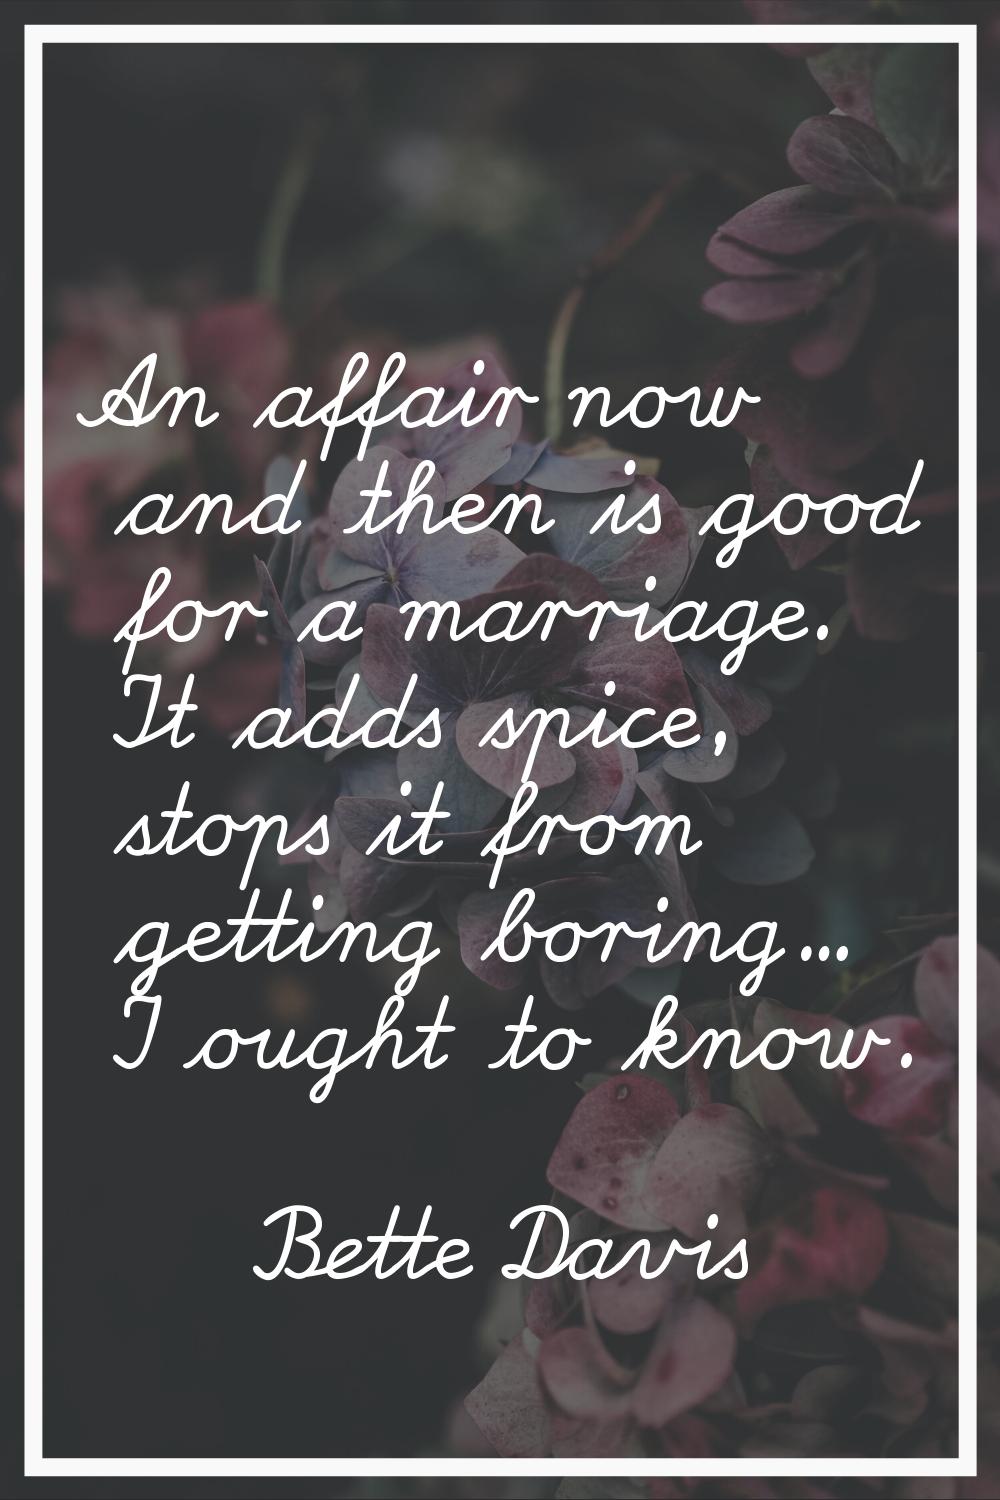 An affair now and then is good for a marriage. It adds spice, stops it from getting boring... I oug